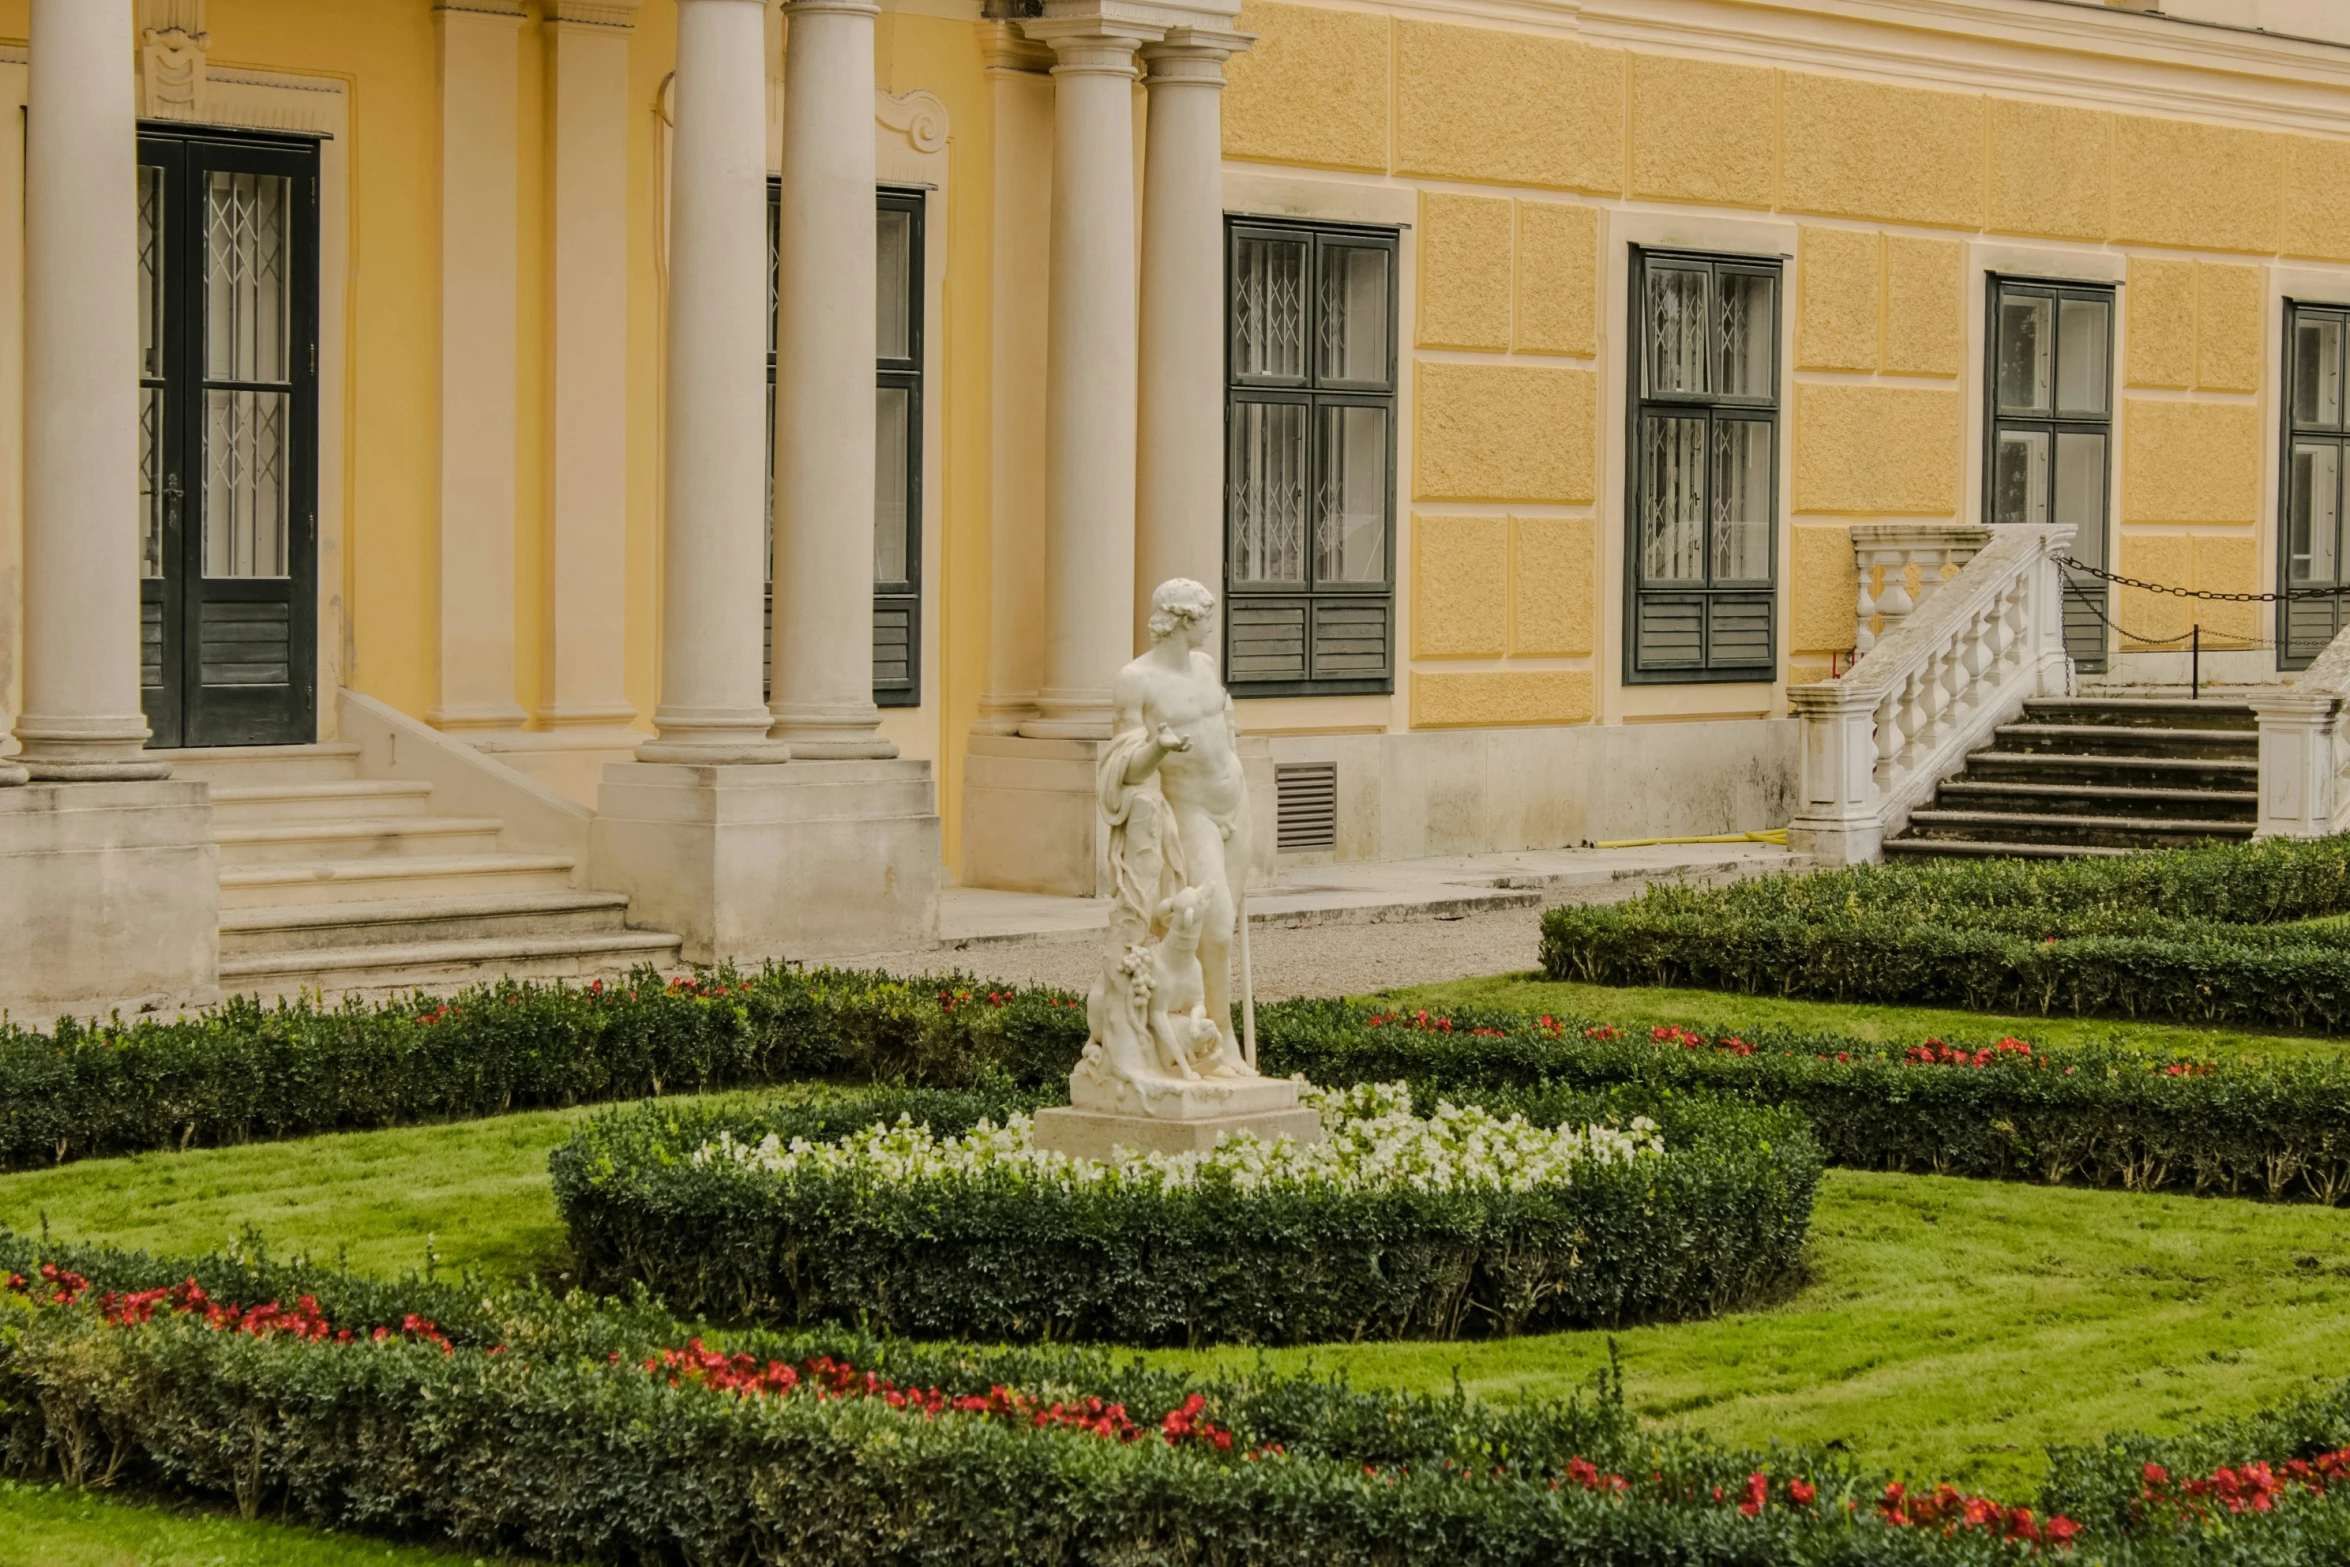 an ornate garden with a statue in the center